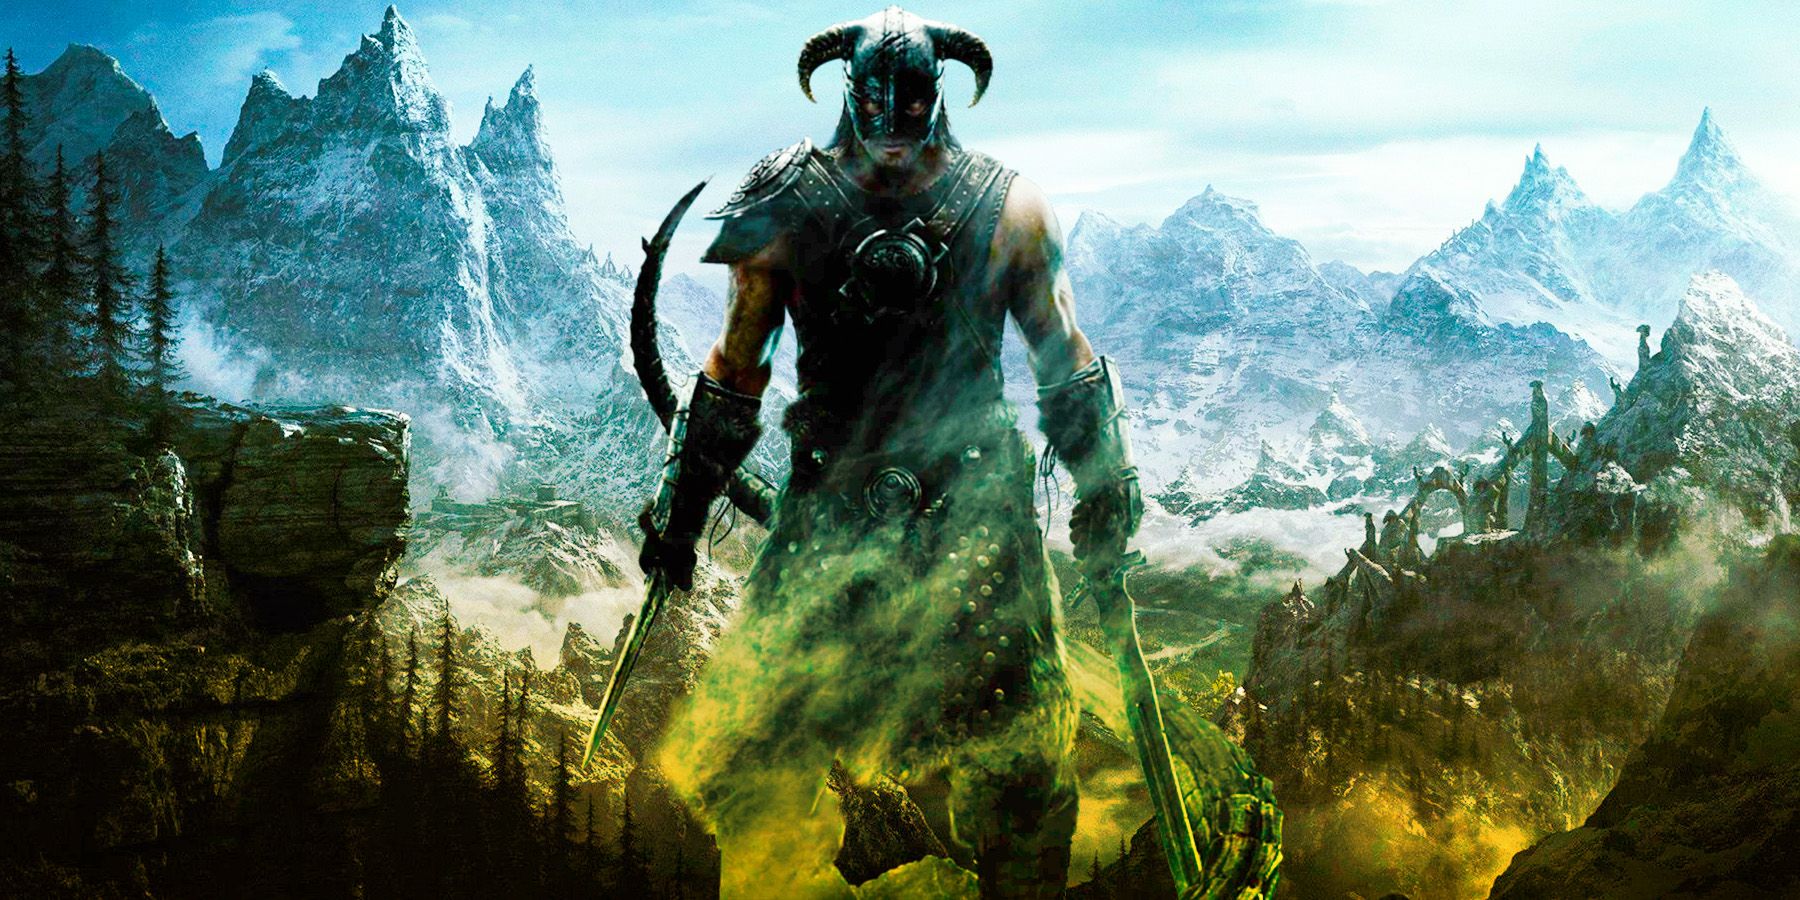 The Dragonborn from Skyrim in front of the mountainous landscape.